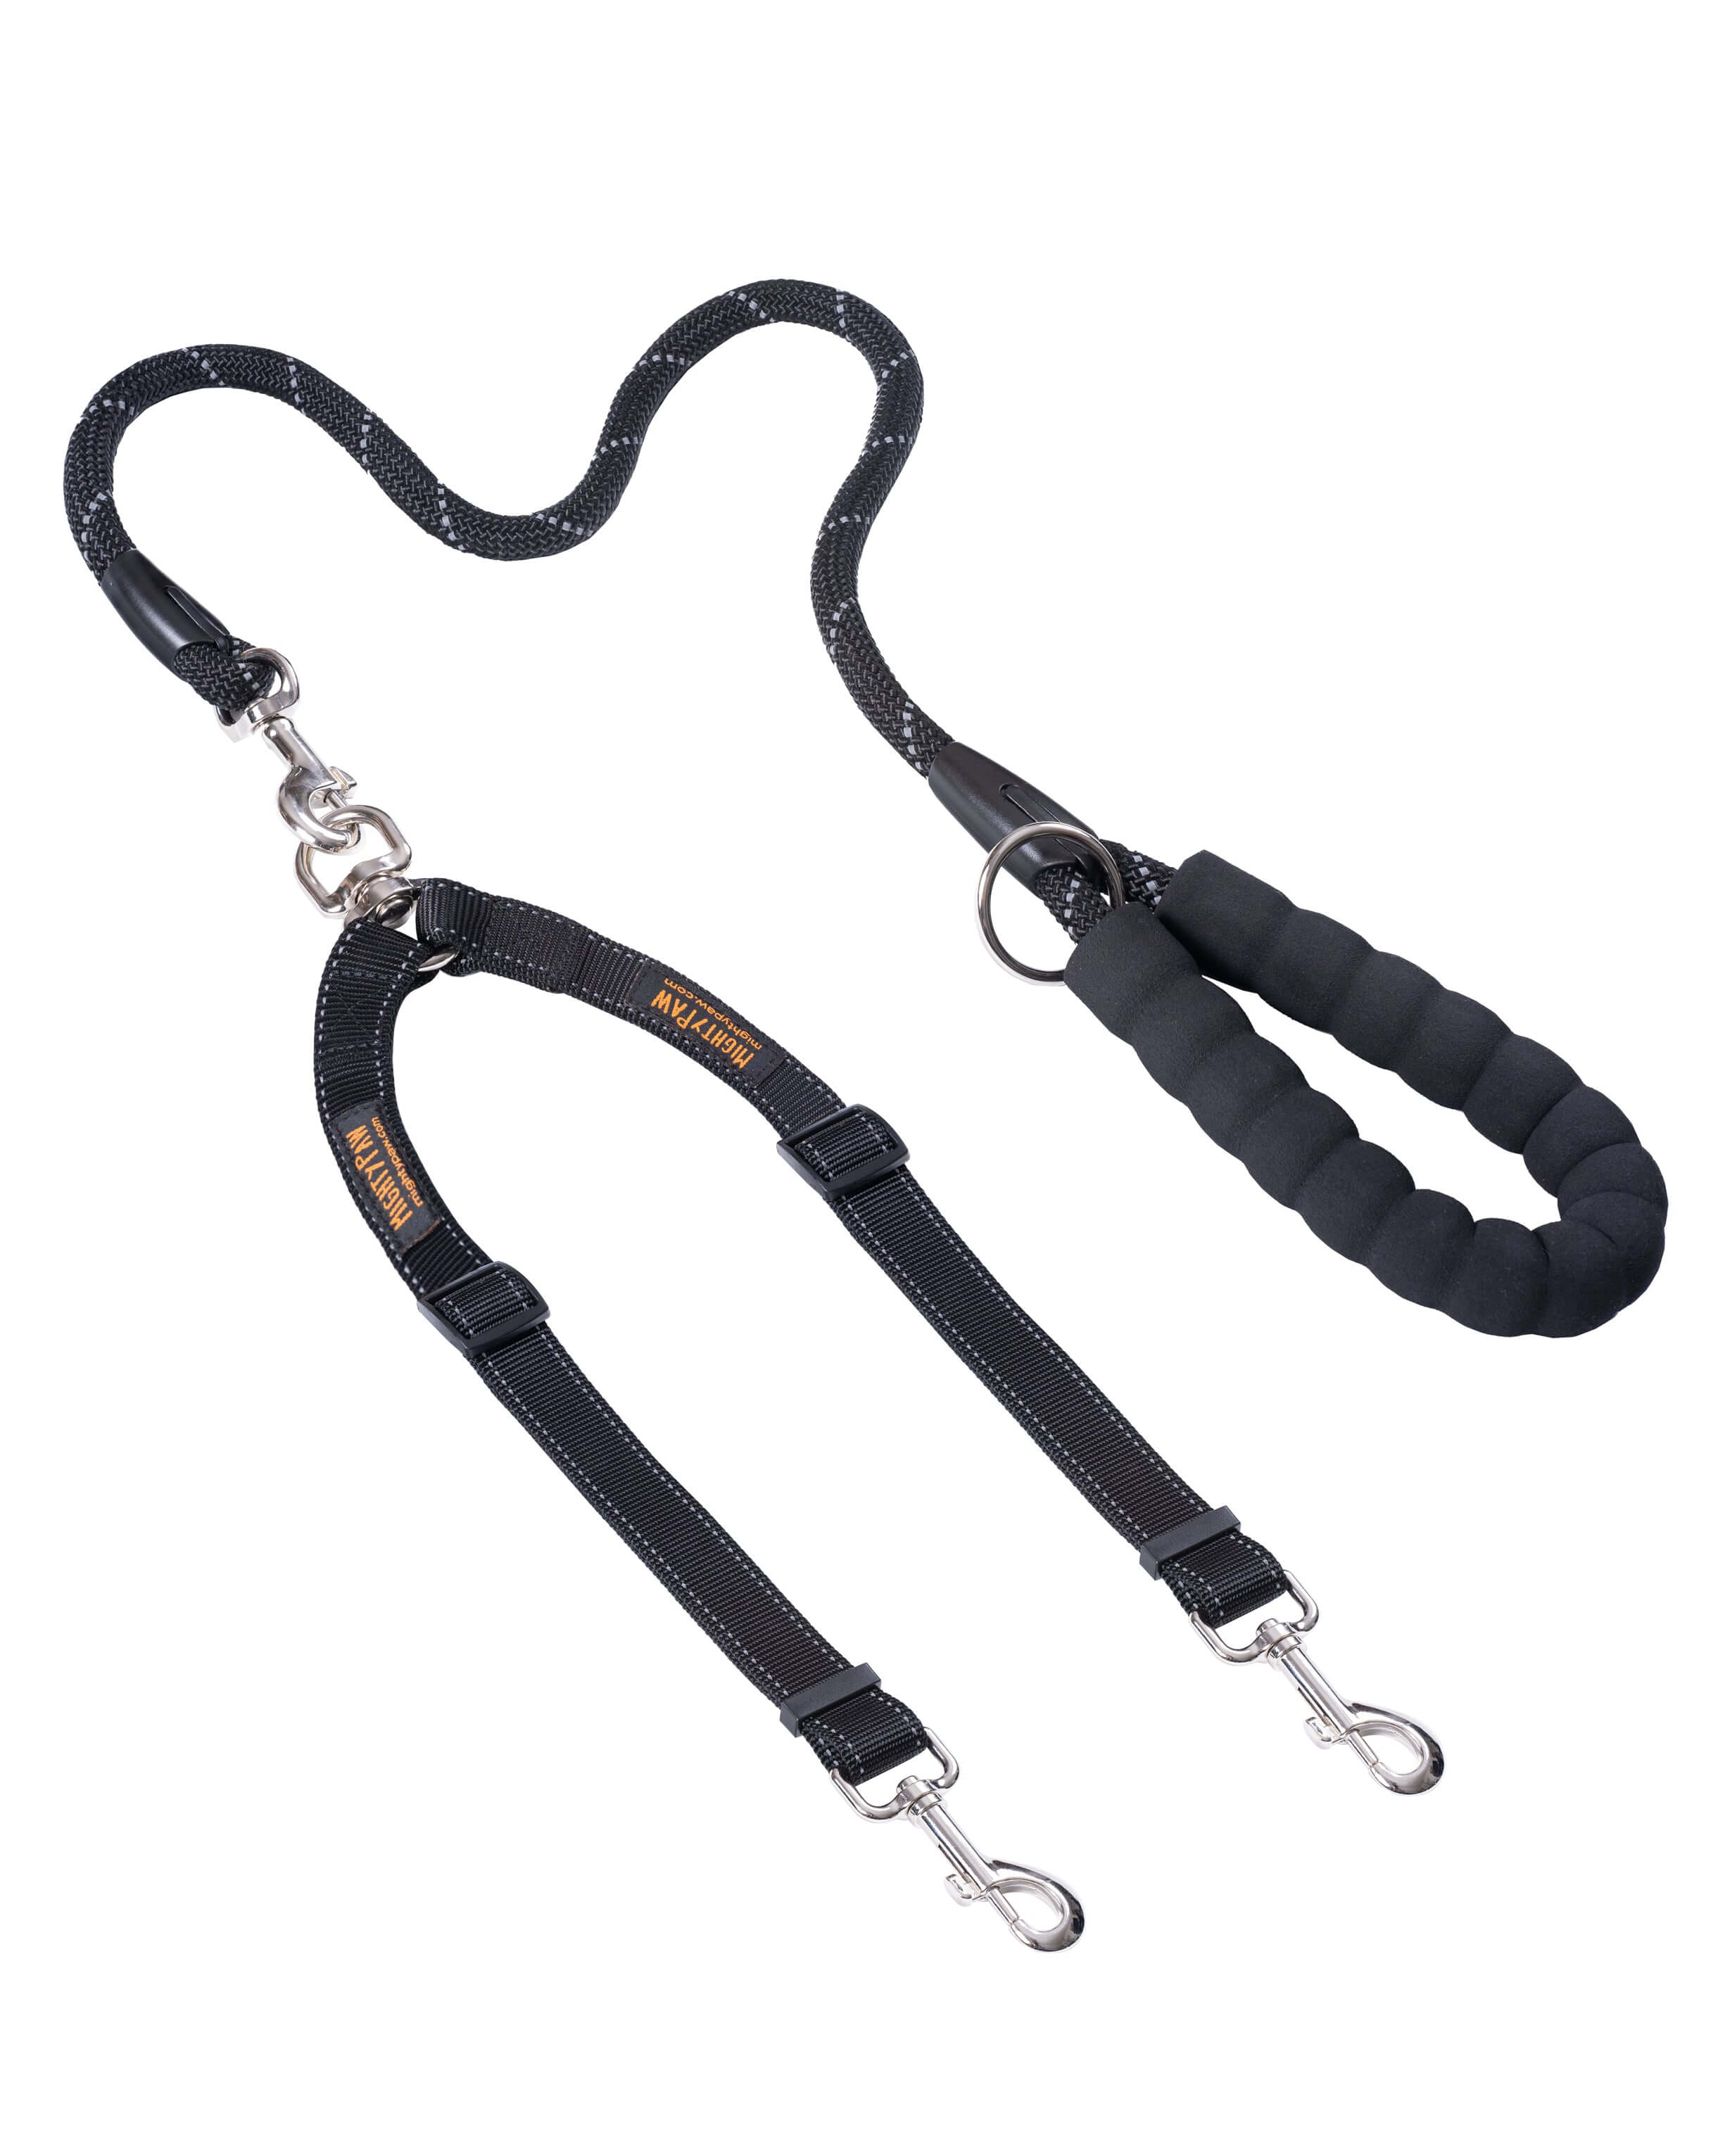 Mighty Paw Double Dog Leash | Dual Pet Leash with Soft Padded Rope Handle and Tangle-Free 360° Swivel Hook Adjustable Length for Small or Large Do